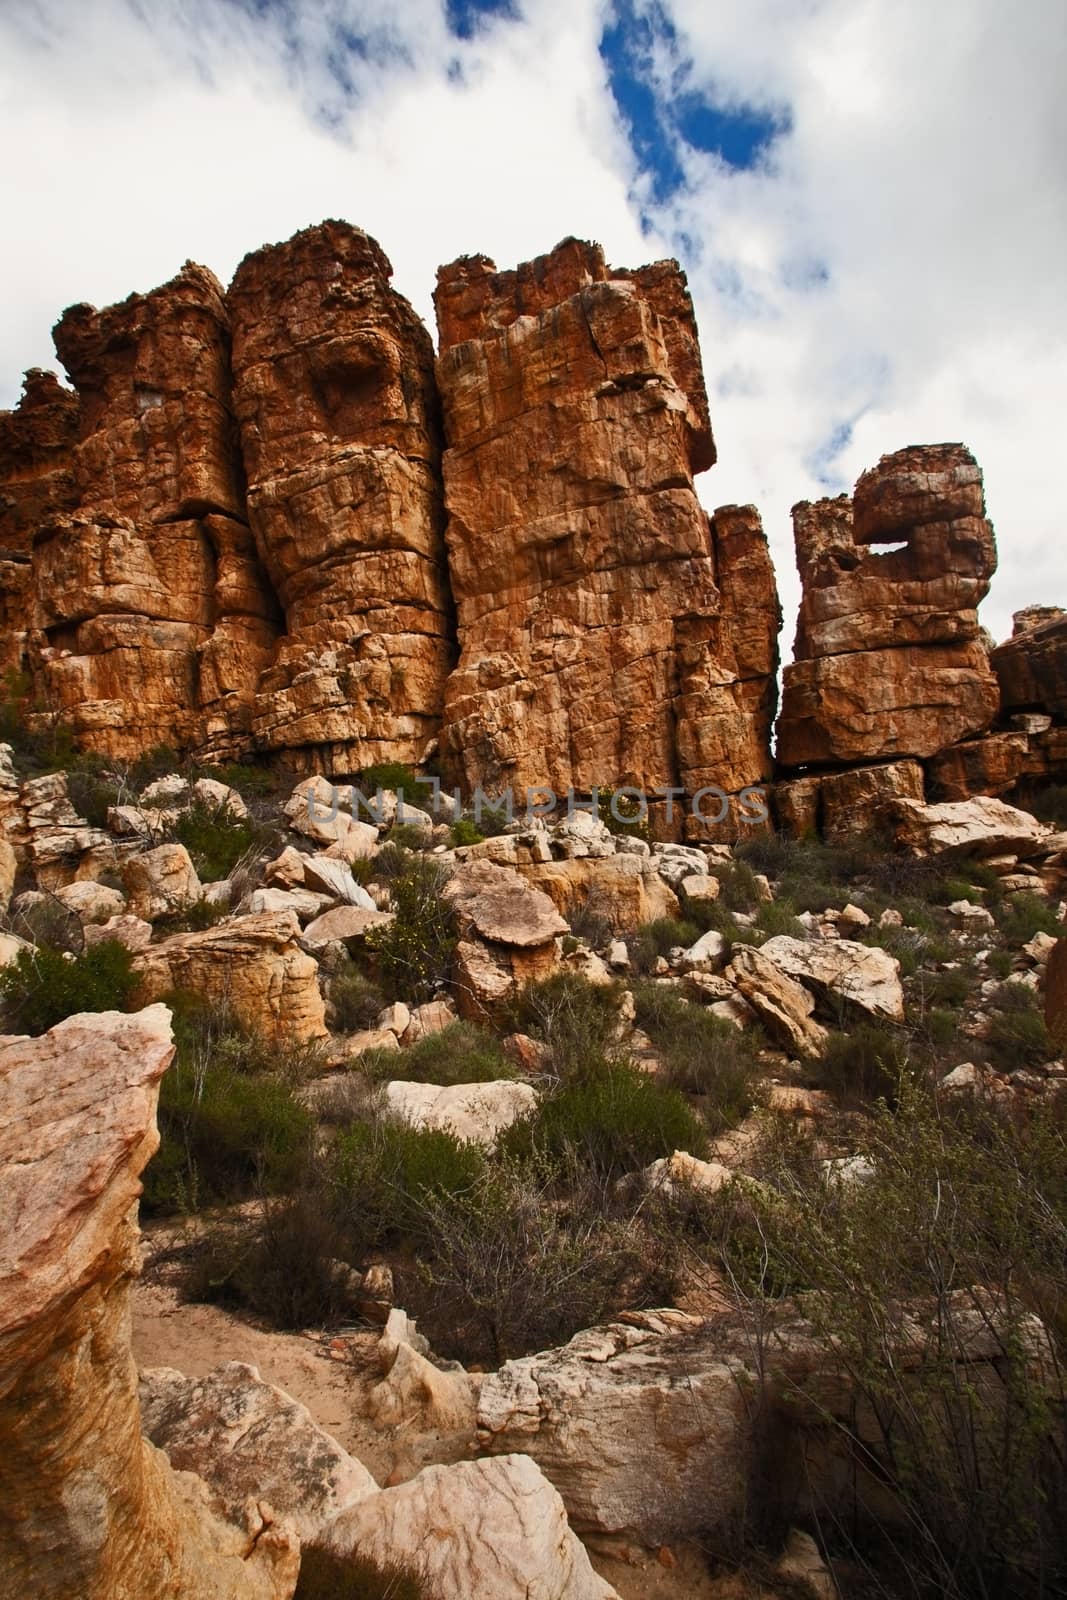 A scene of highly eroded sandstone formations in the Cederberg Wilderness Area, Western Cape. South Africa